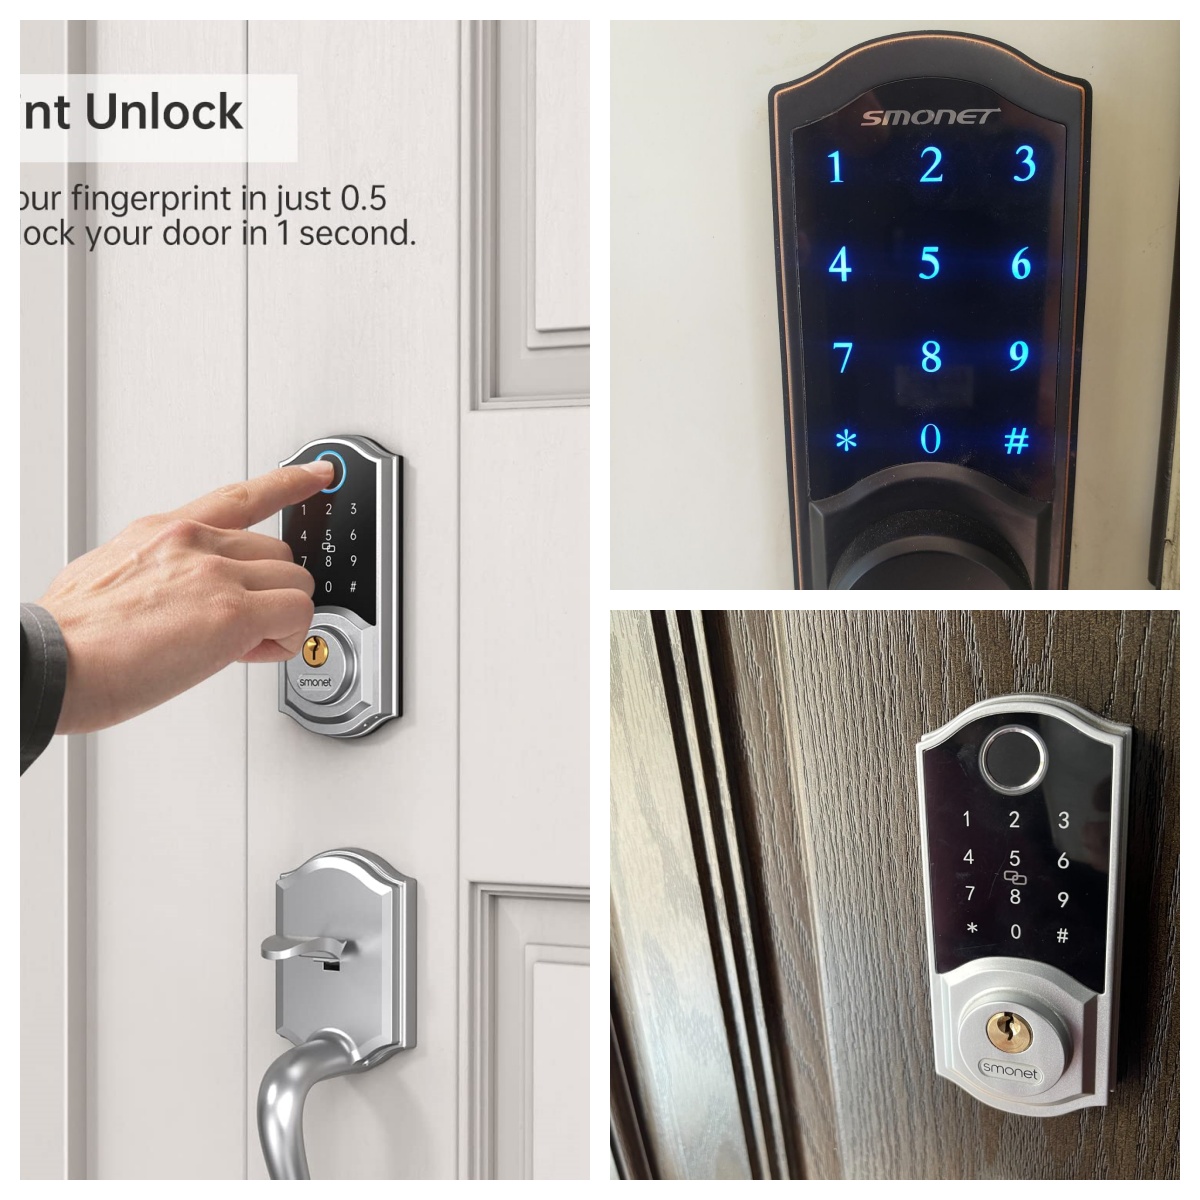 Any recommendations on smart door locks? I have a type of security